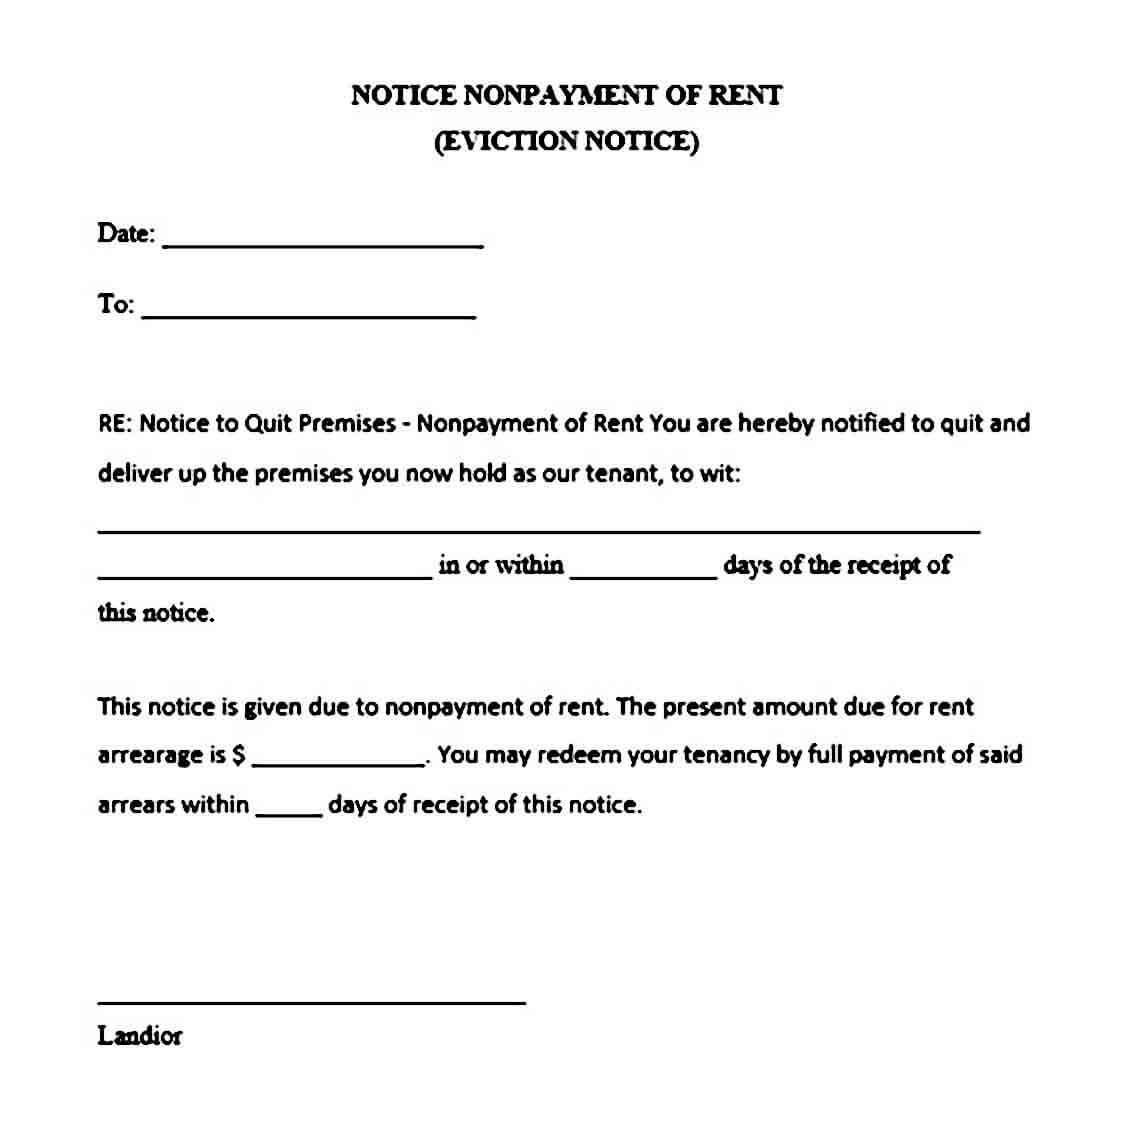 Nonpayment of Rent Eviction Notice